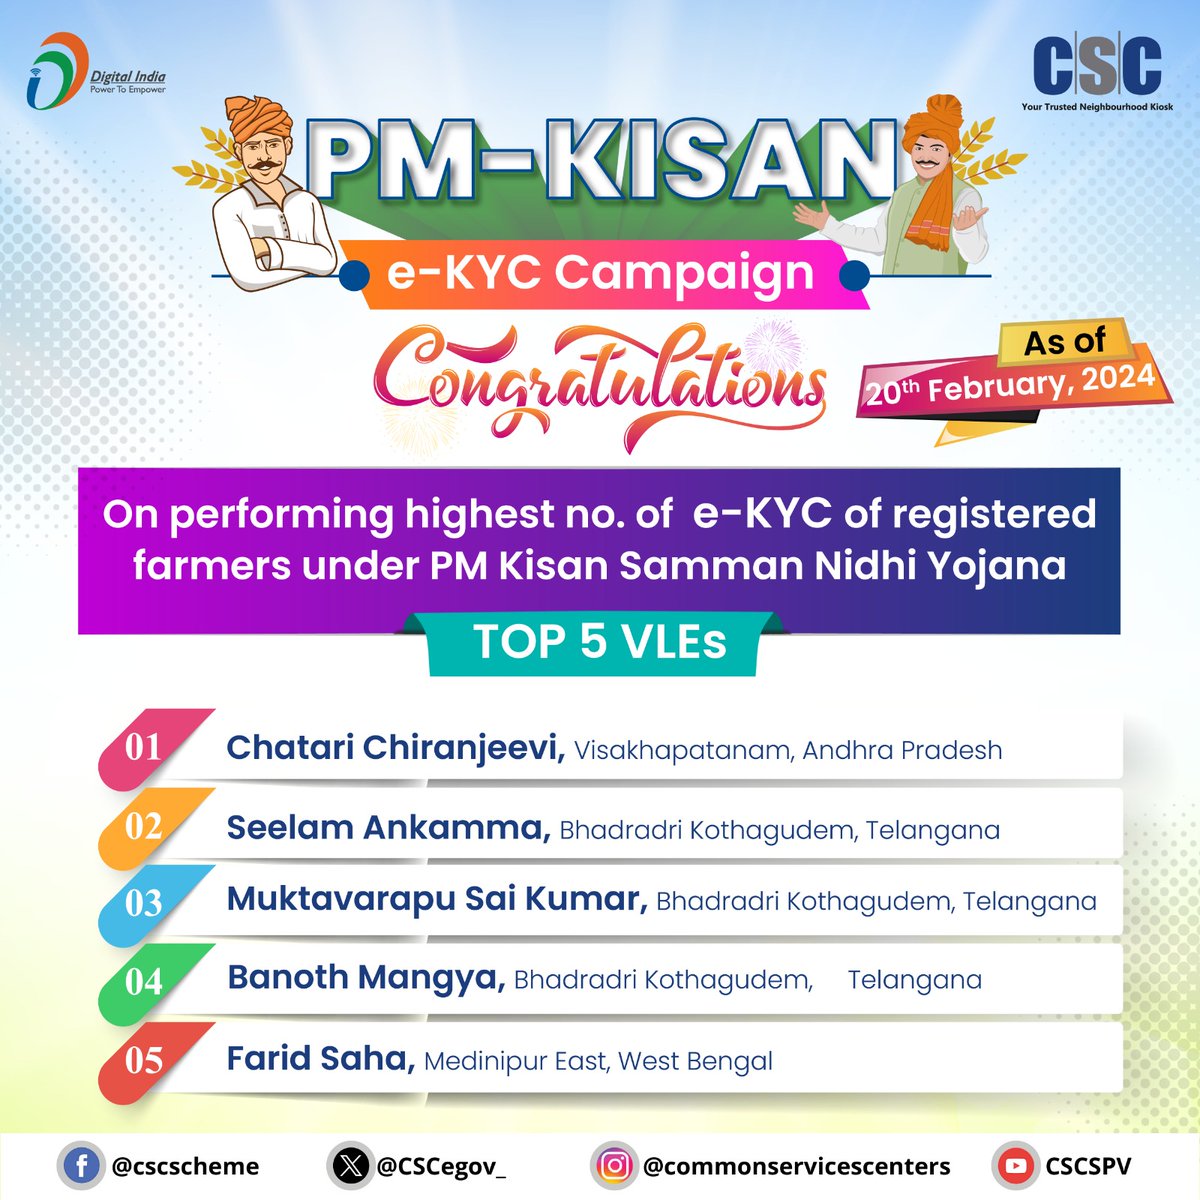 Last date to complete e-KYC of farmers under #PMKisanSammanNidhi Yojana. Here's to the Top 5 VLEs so far! VLEs, rise up and earn rewards for completing maximum e-KYCs. #PMKisan #PMKisan16thInstalment #CSC #Agriculture #FarmersWelfare #Farmers